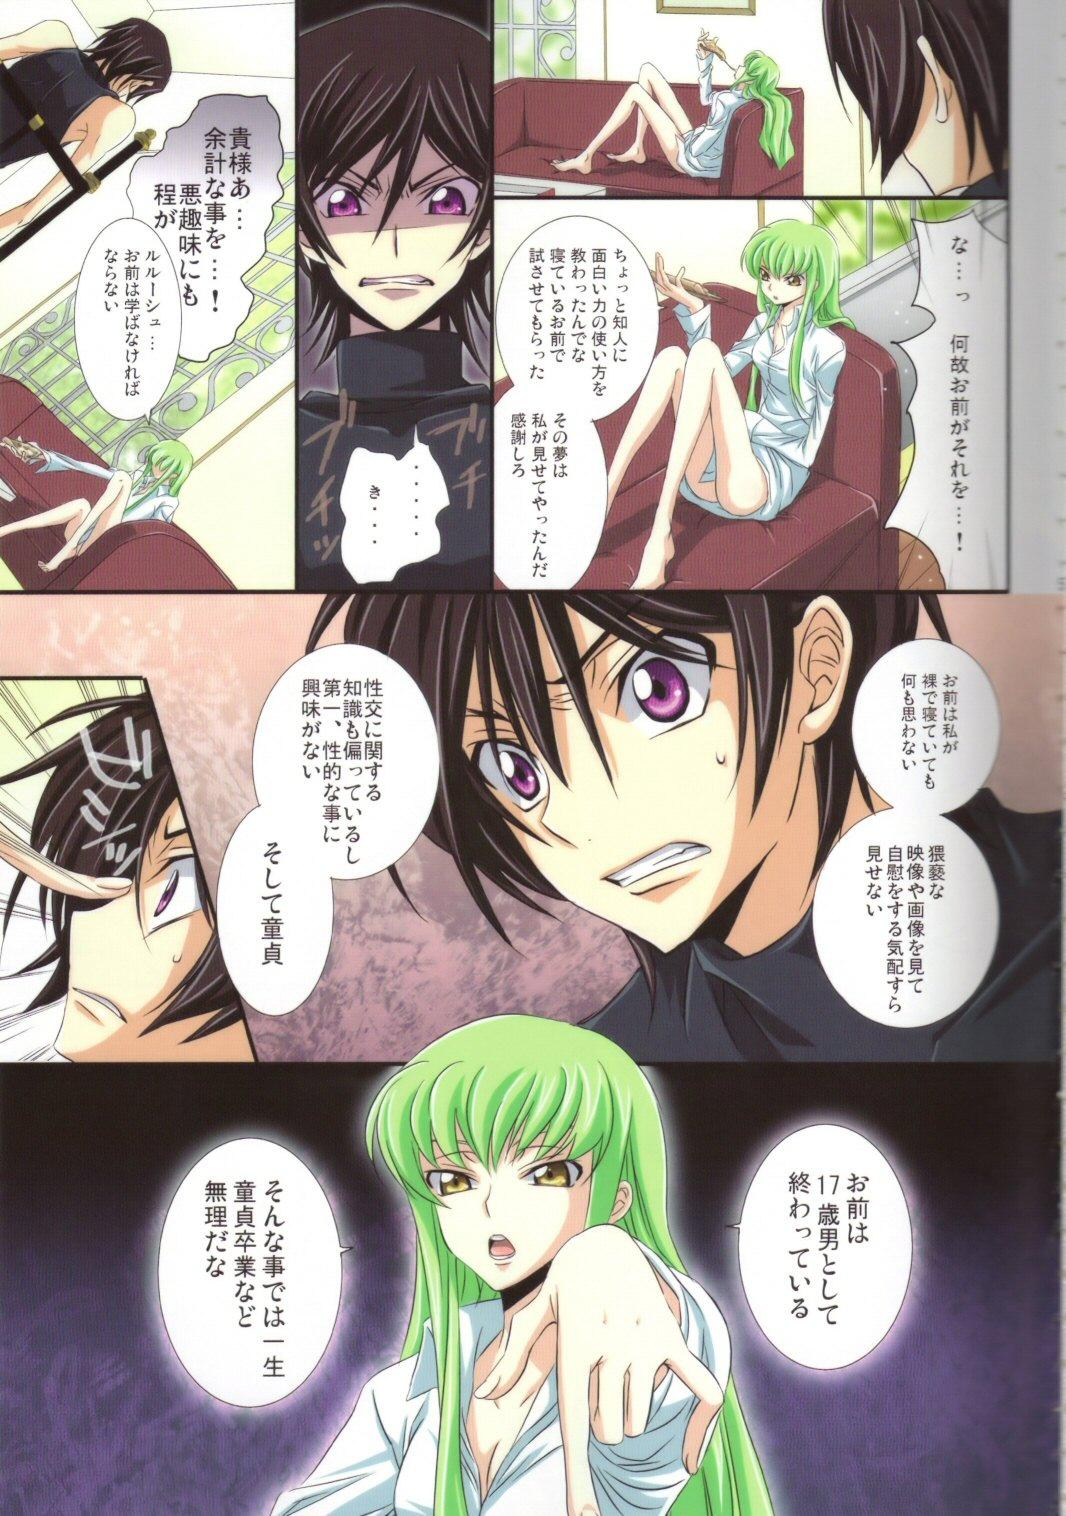 Best Blowjobs Ever on・non・om - Code geass Calcinha - Page 4